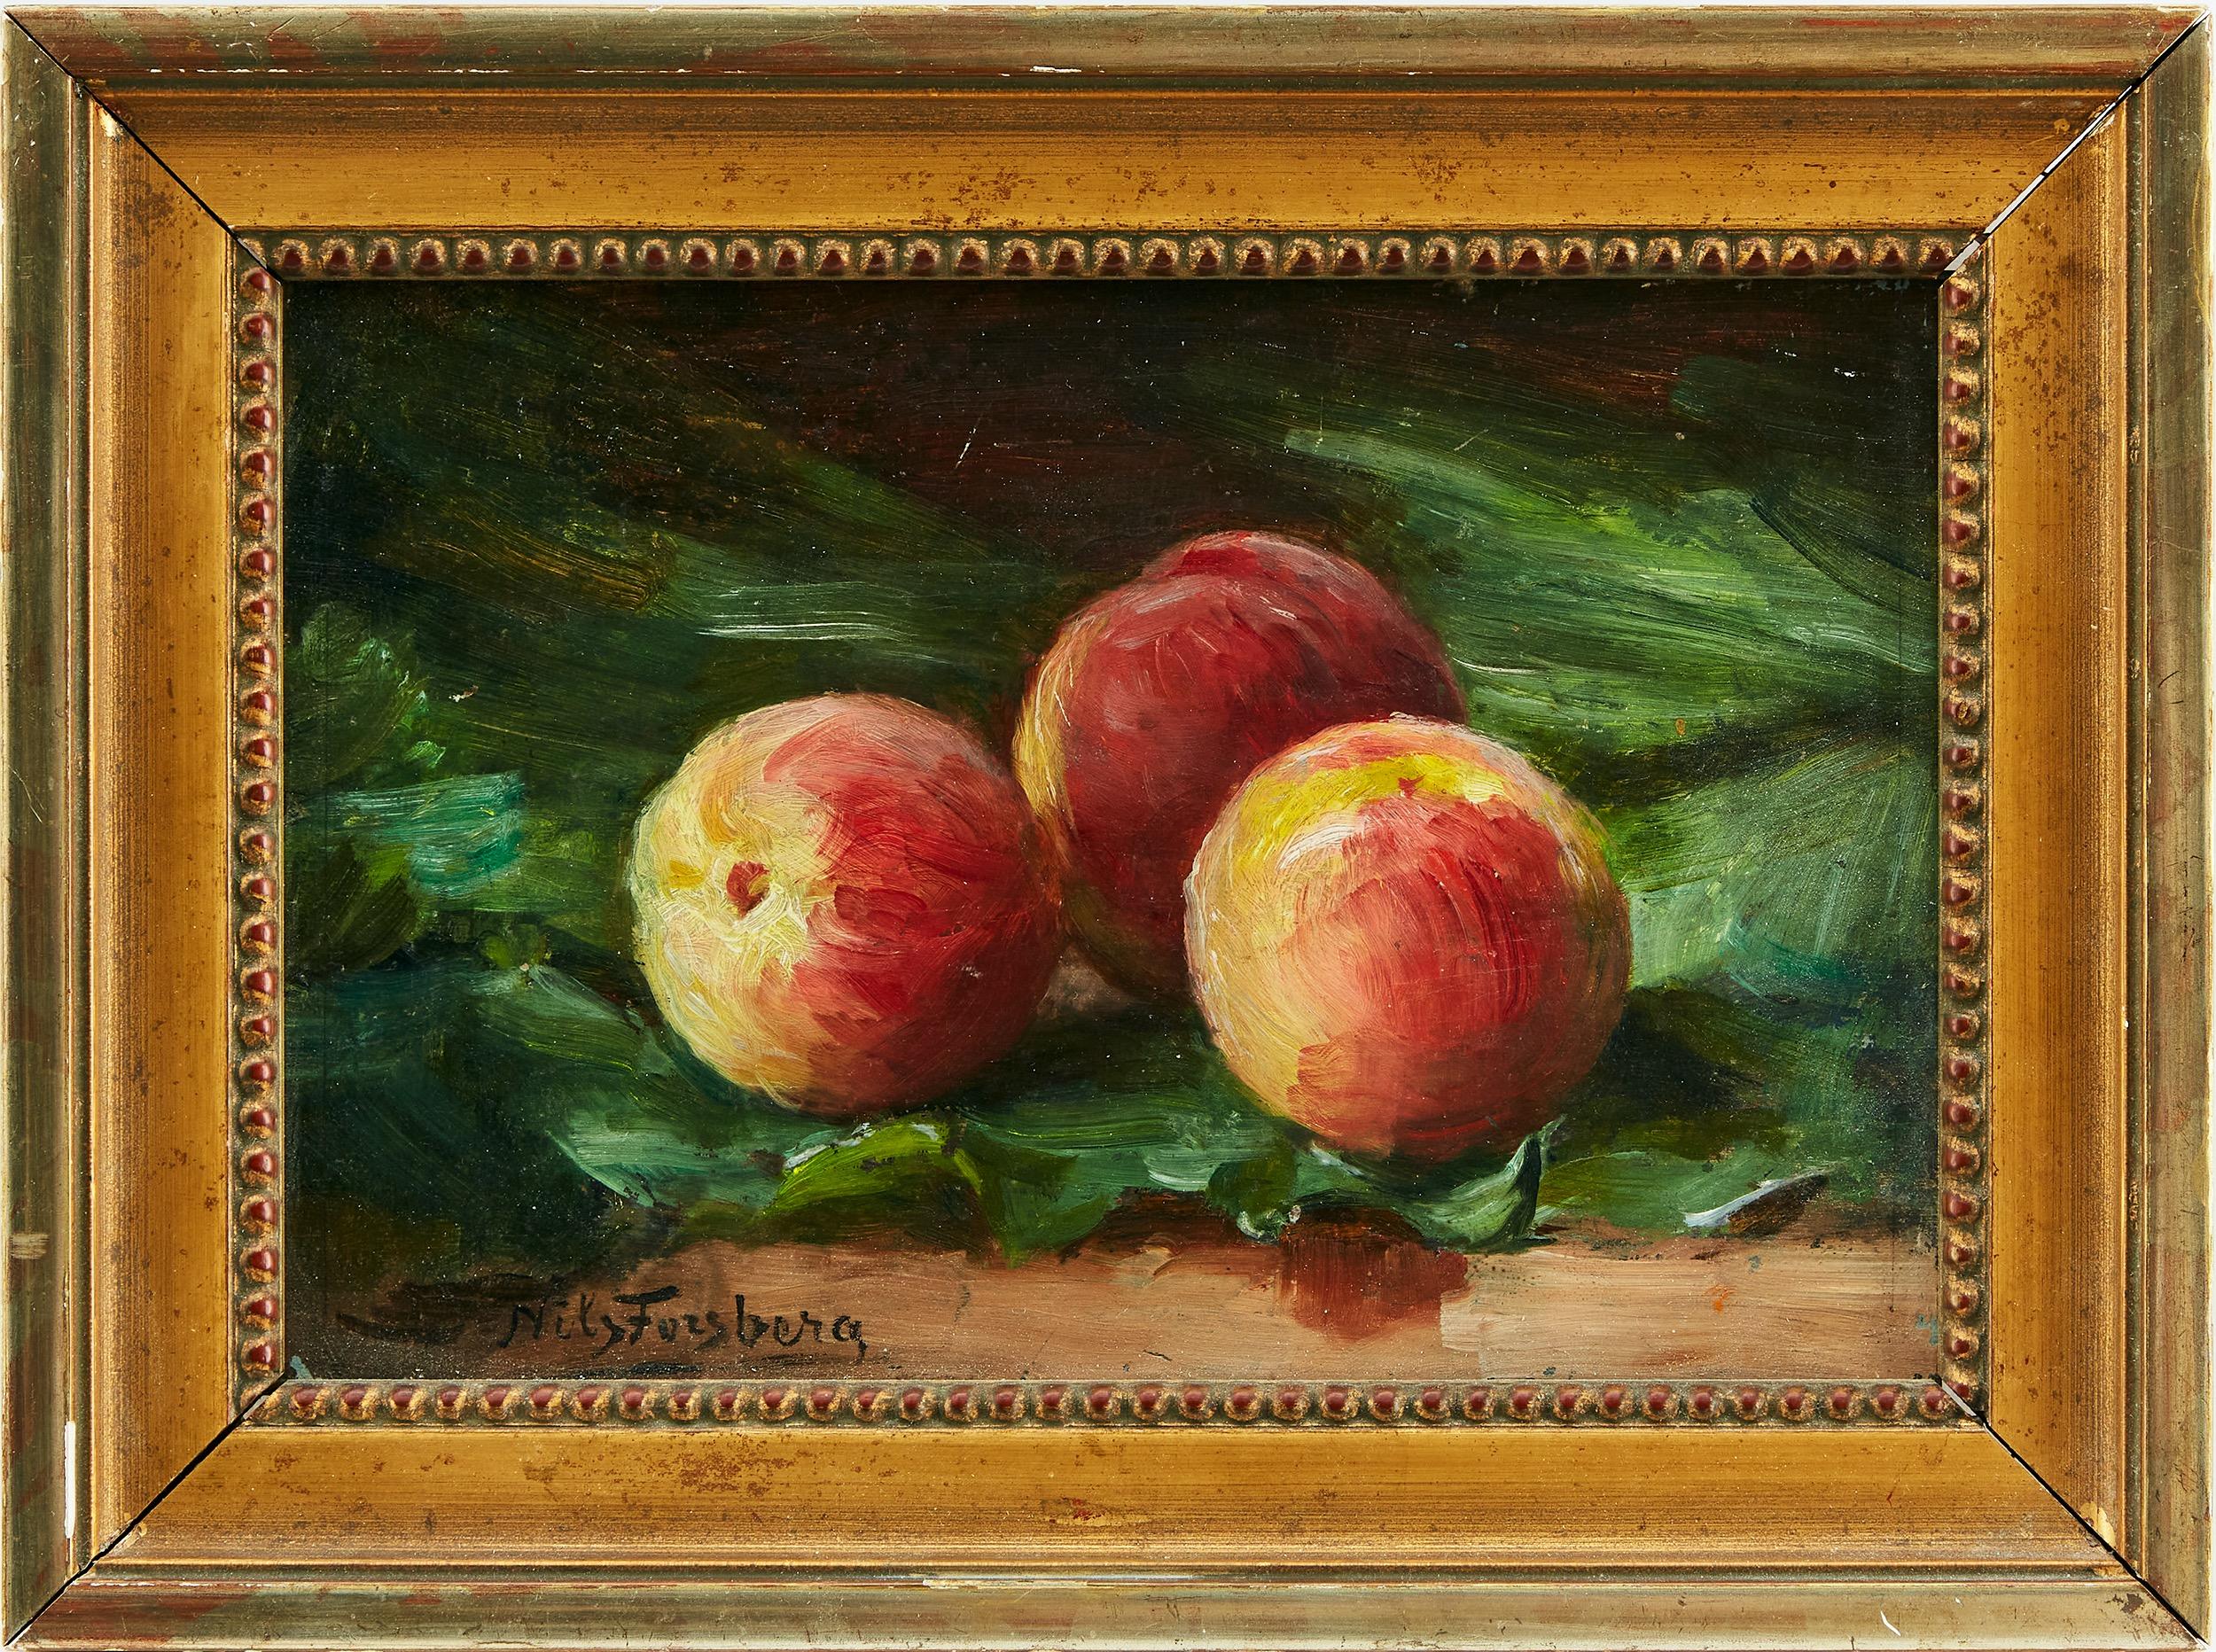 A colorful and lovely small still life in the impressionist style with three peaches on a bed of green leaves signed by Nils Forsberg I (1842-1934). Probably painted around 1880-90. 

Nils Forsberg was born in a poor home outside a small village. 